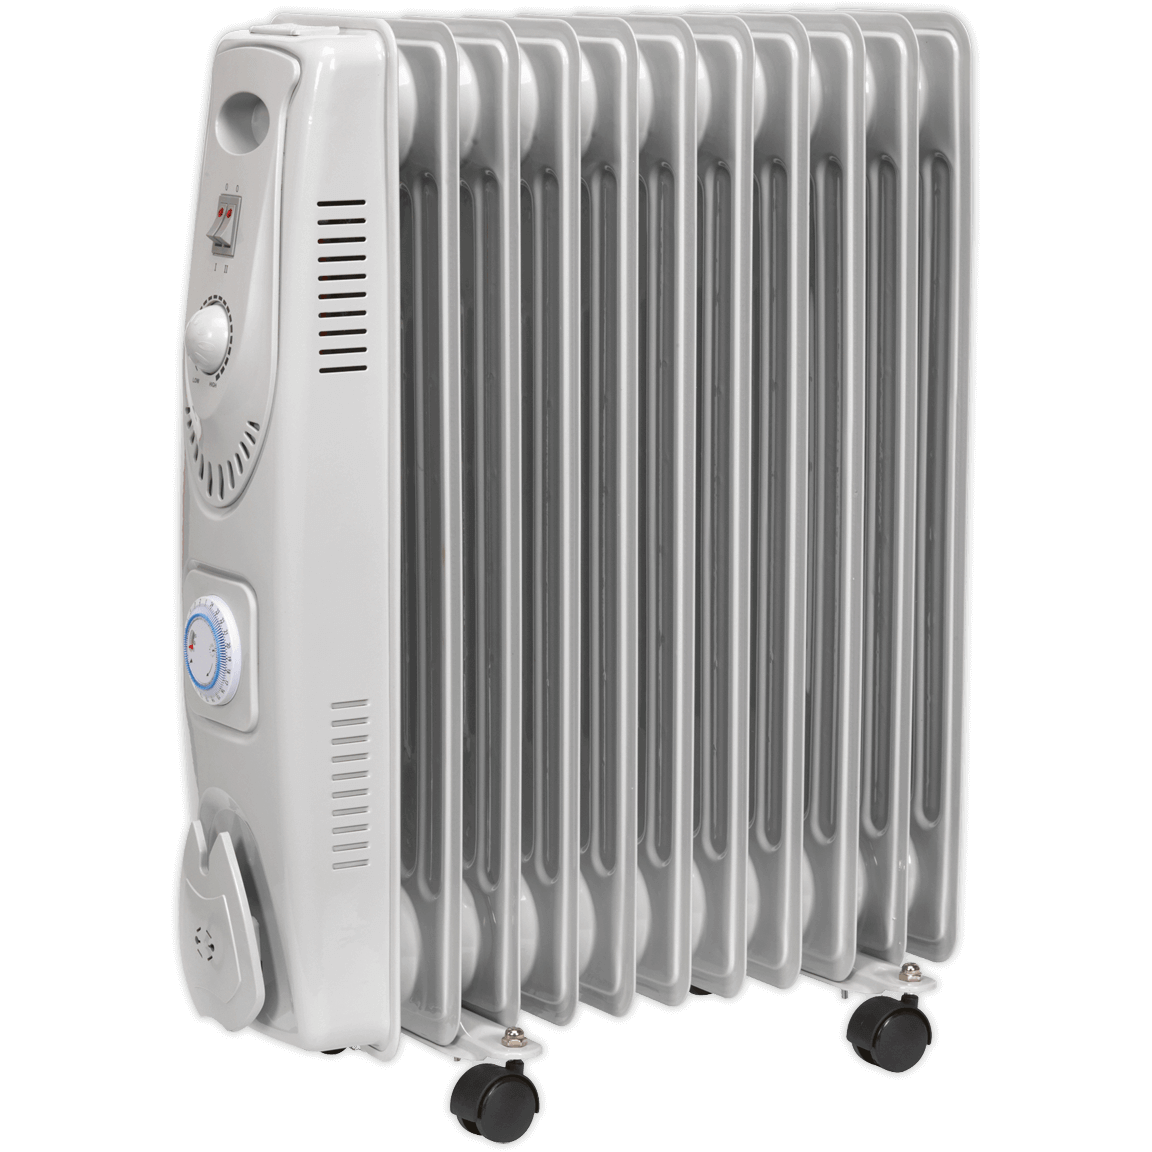 Sealey RD2500T Oil Filled Radiator with Thermostat and Timer 240v